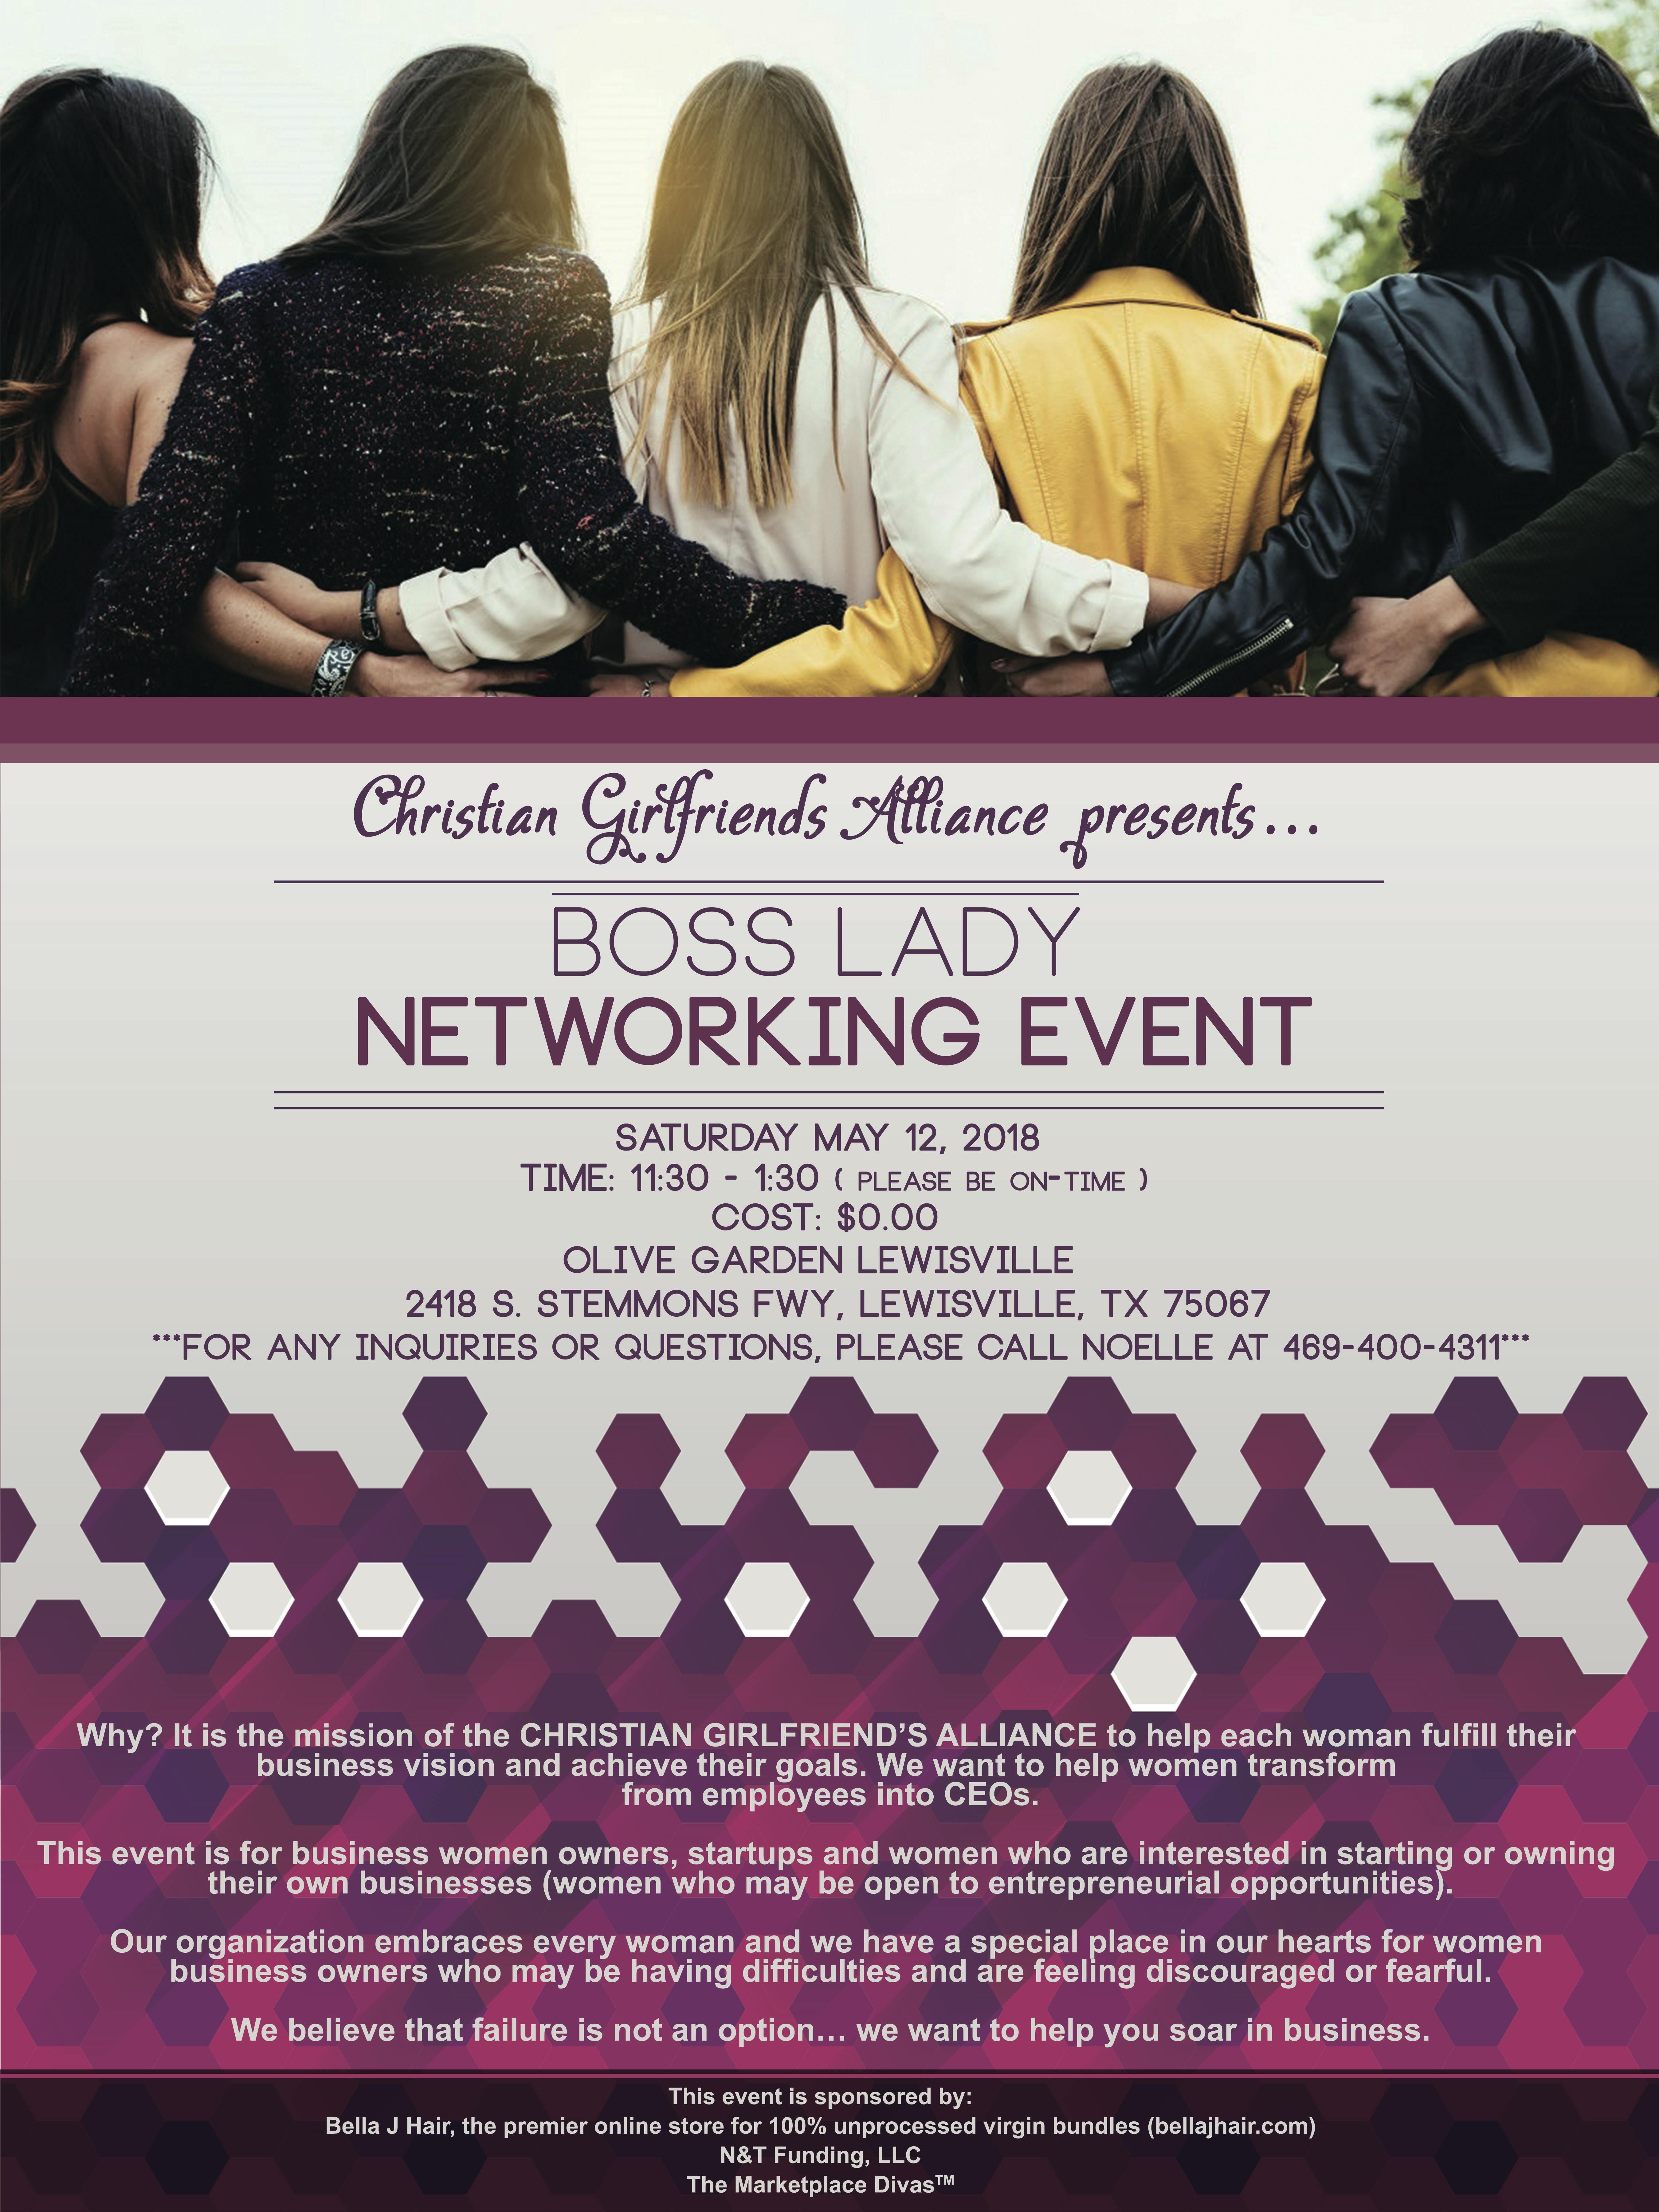 Christian Girlfriends Alliance Dallas Networking Event 12 May 2018